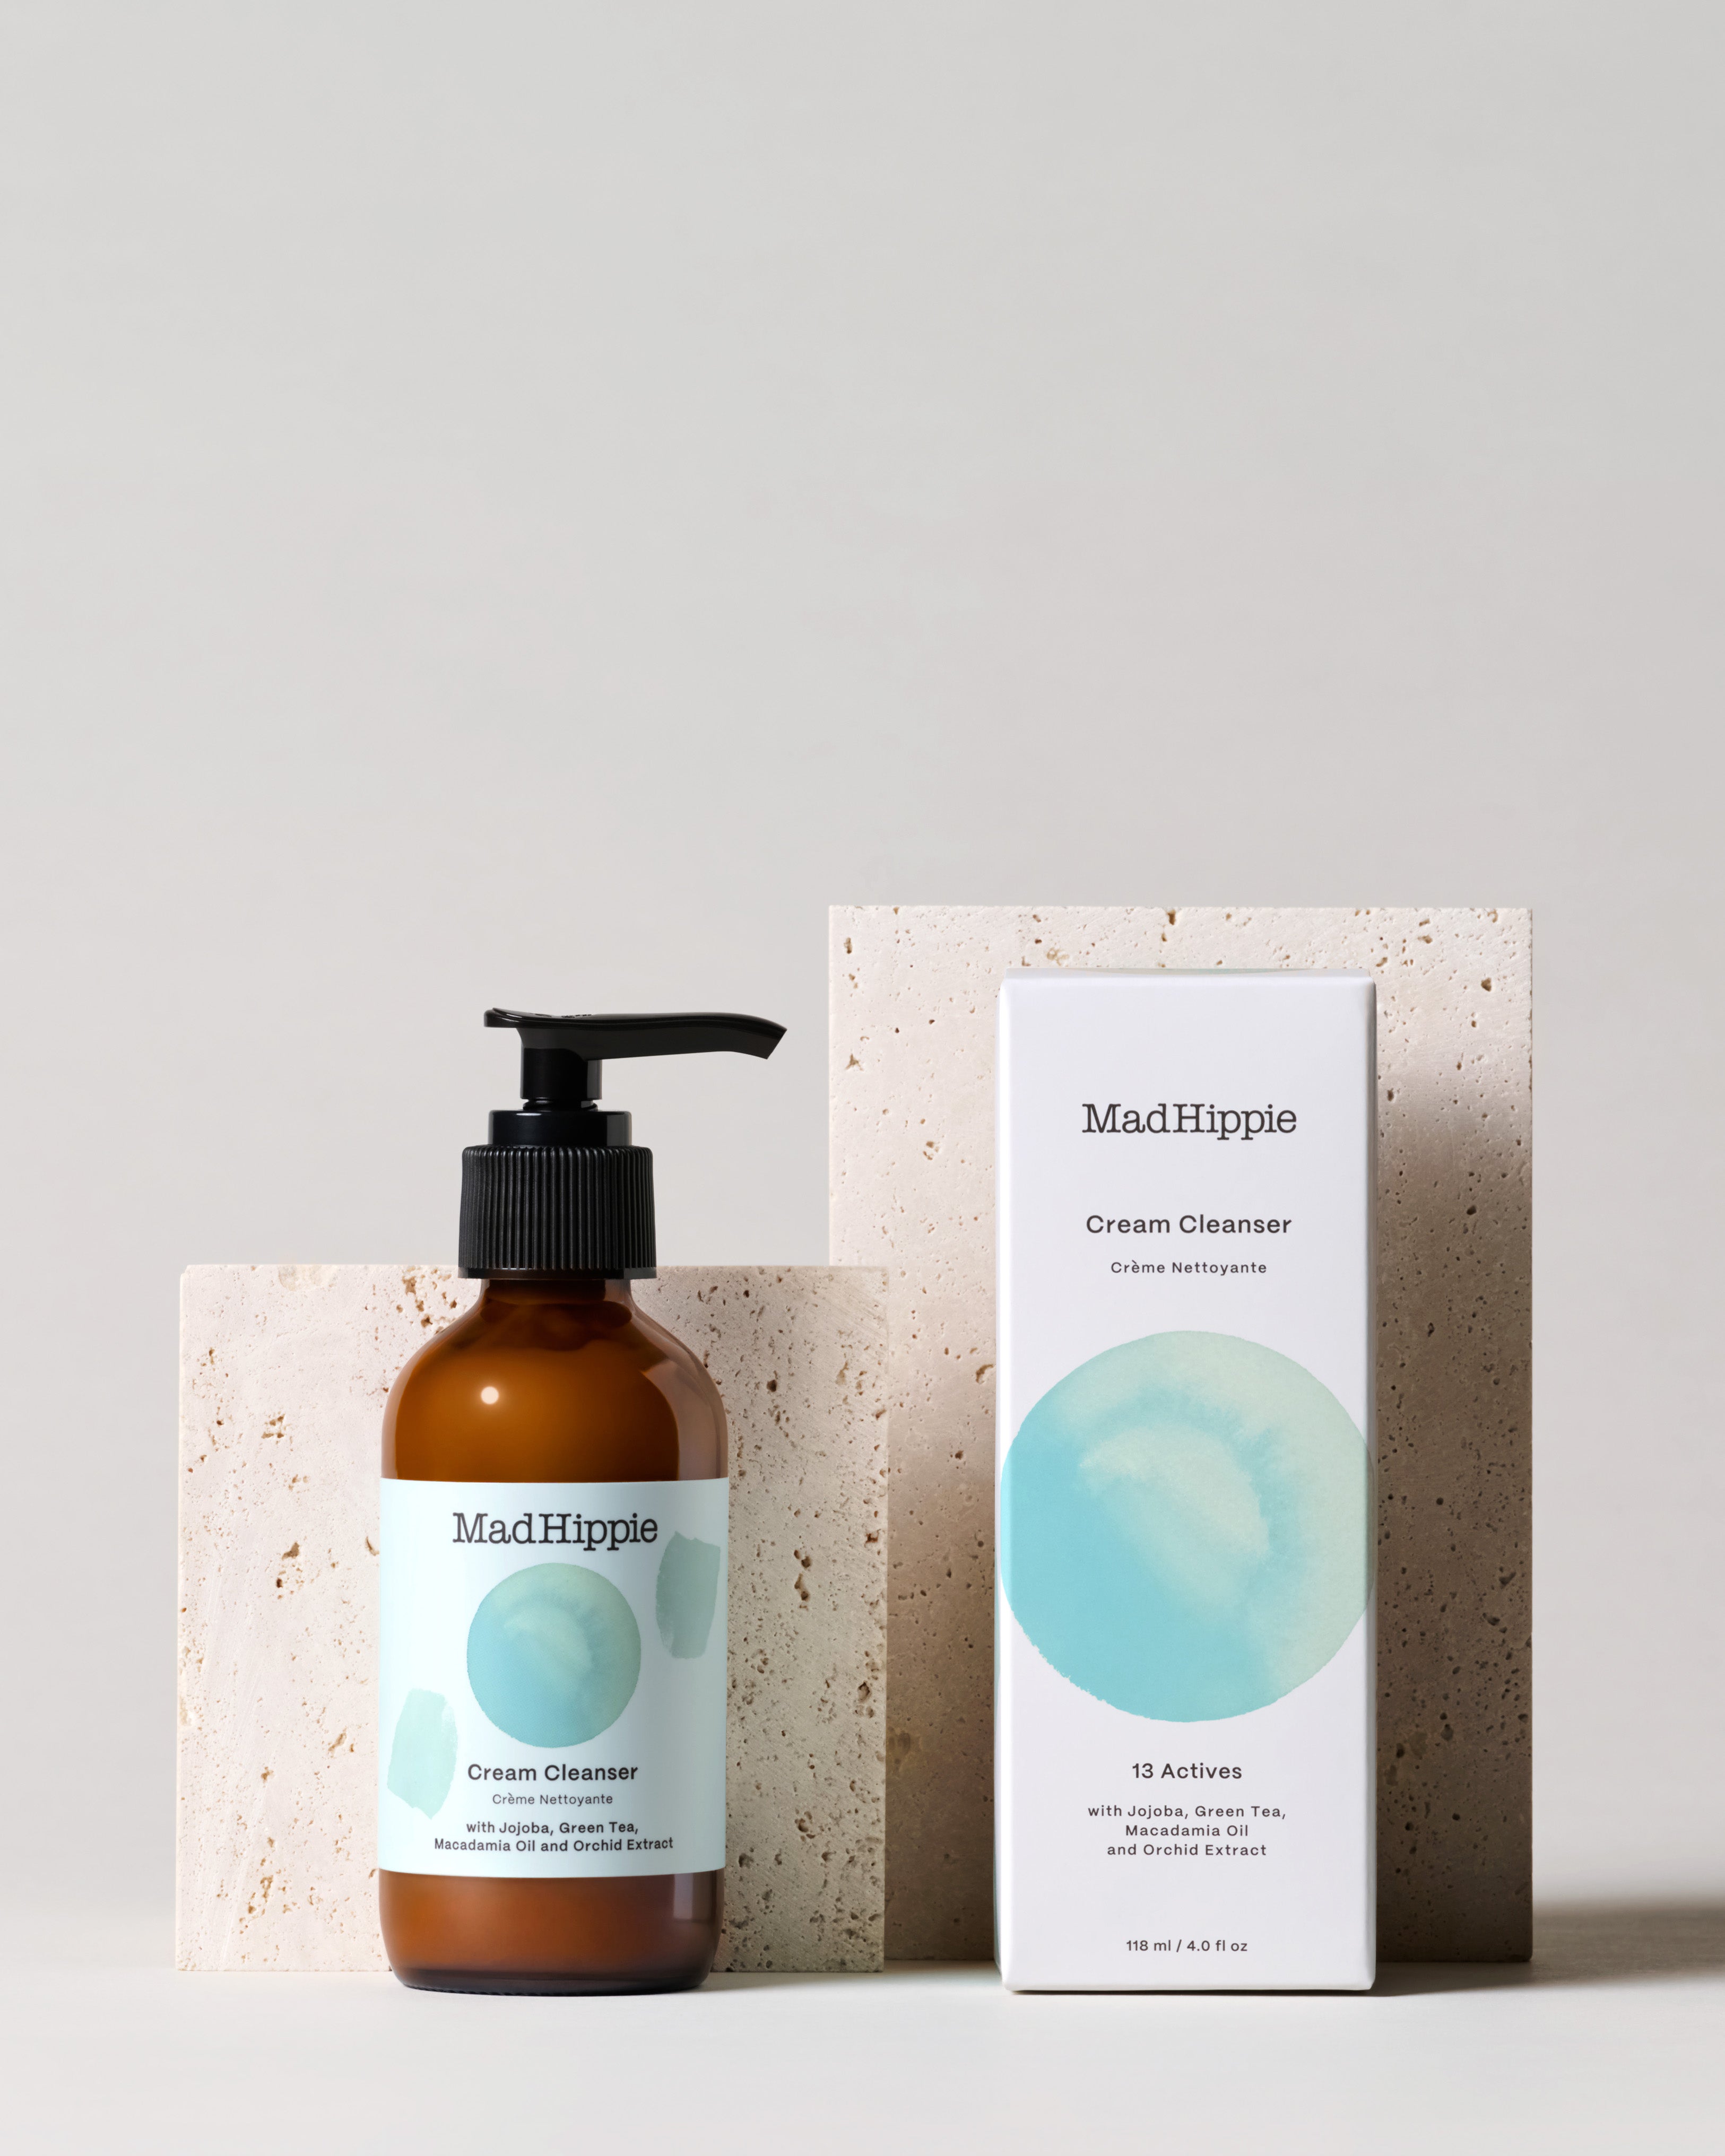 Cream Cleanser bottle + box in front of stone slabs, with gray background